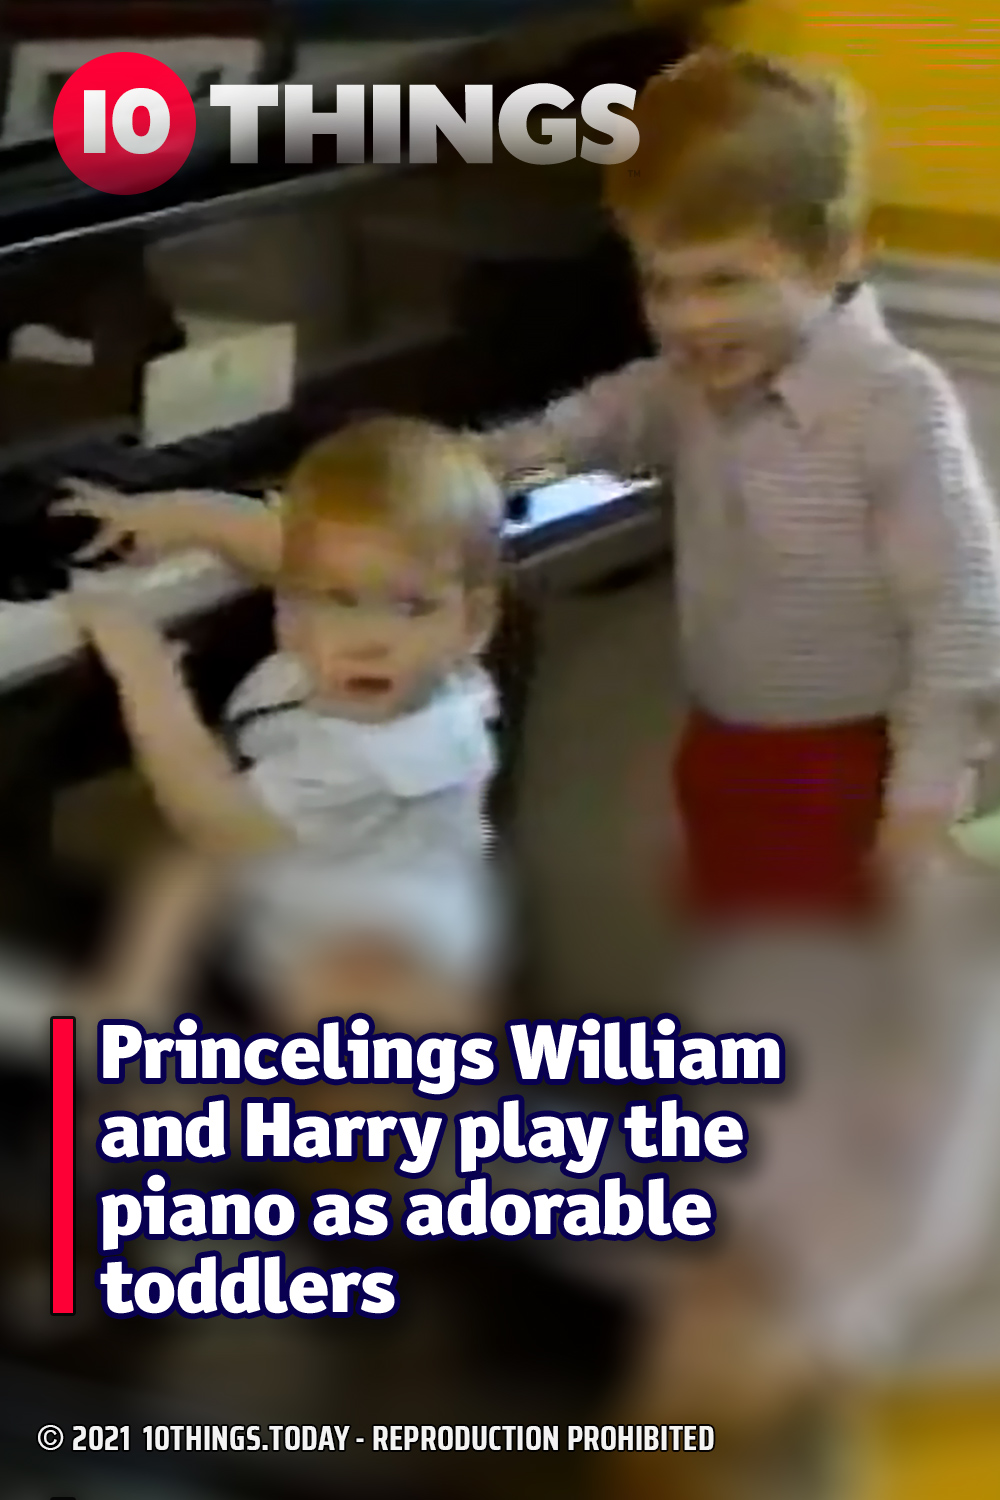 Princelings William and Harry play the piano as adorable toddlers